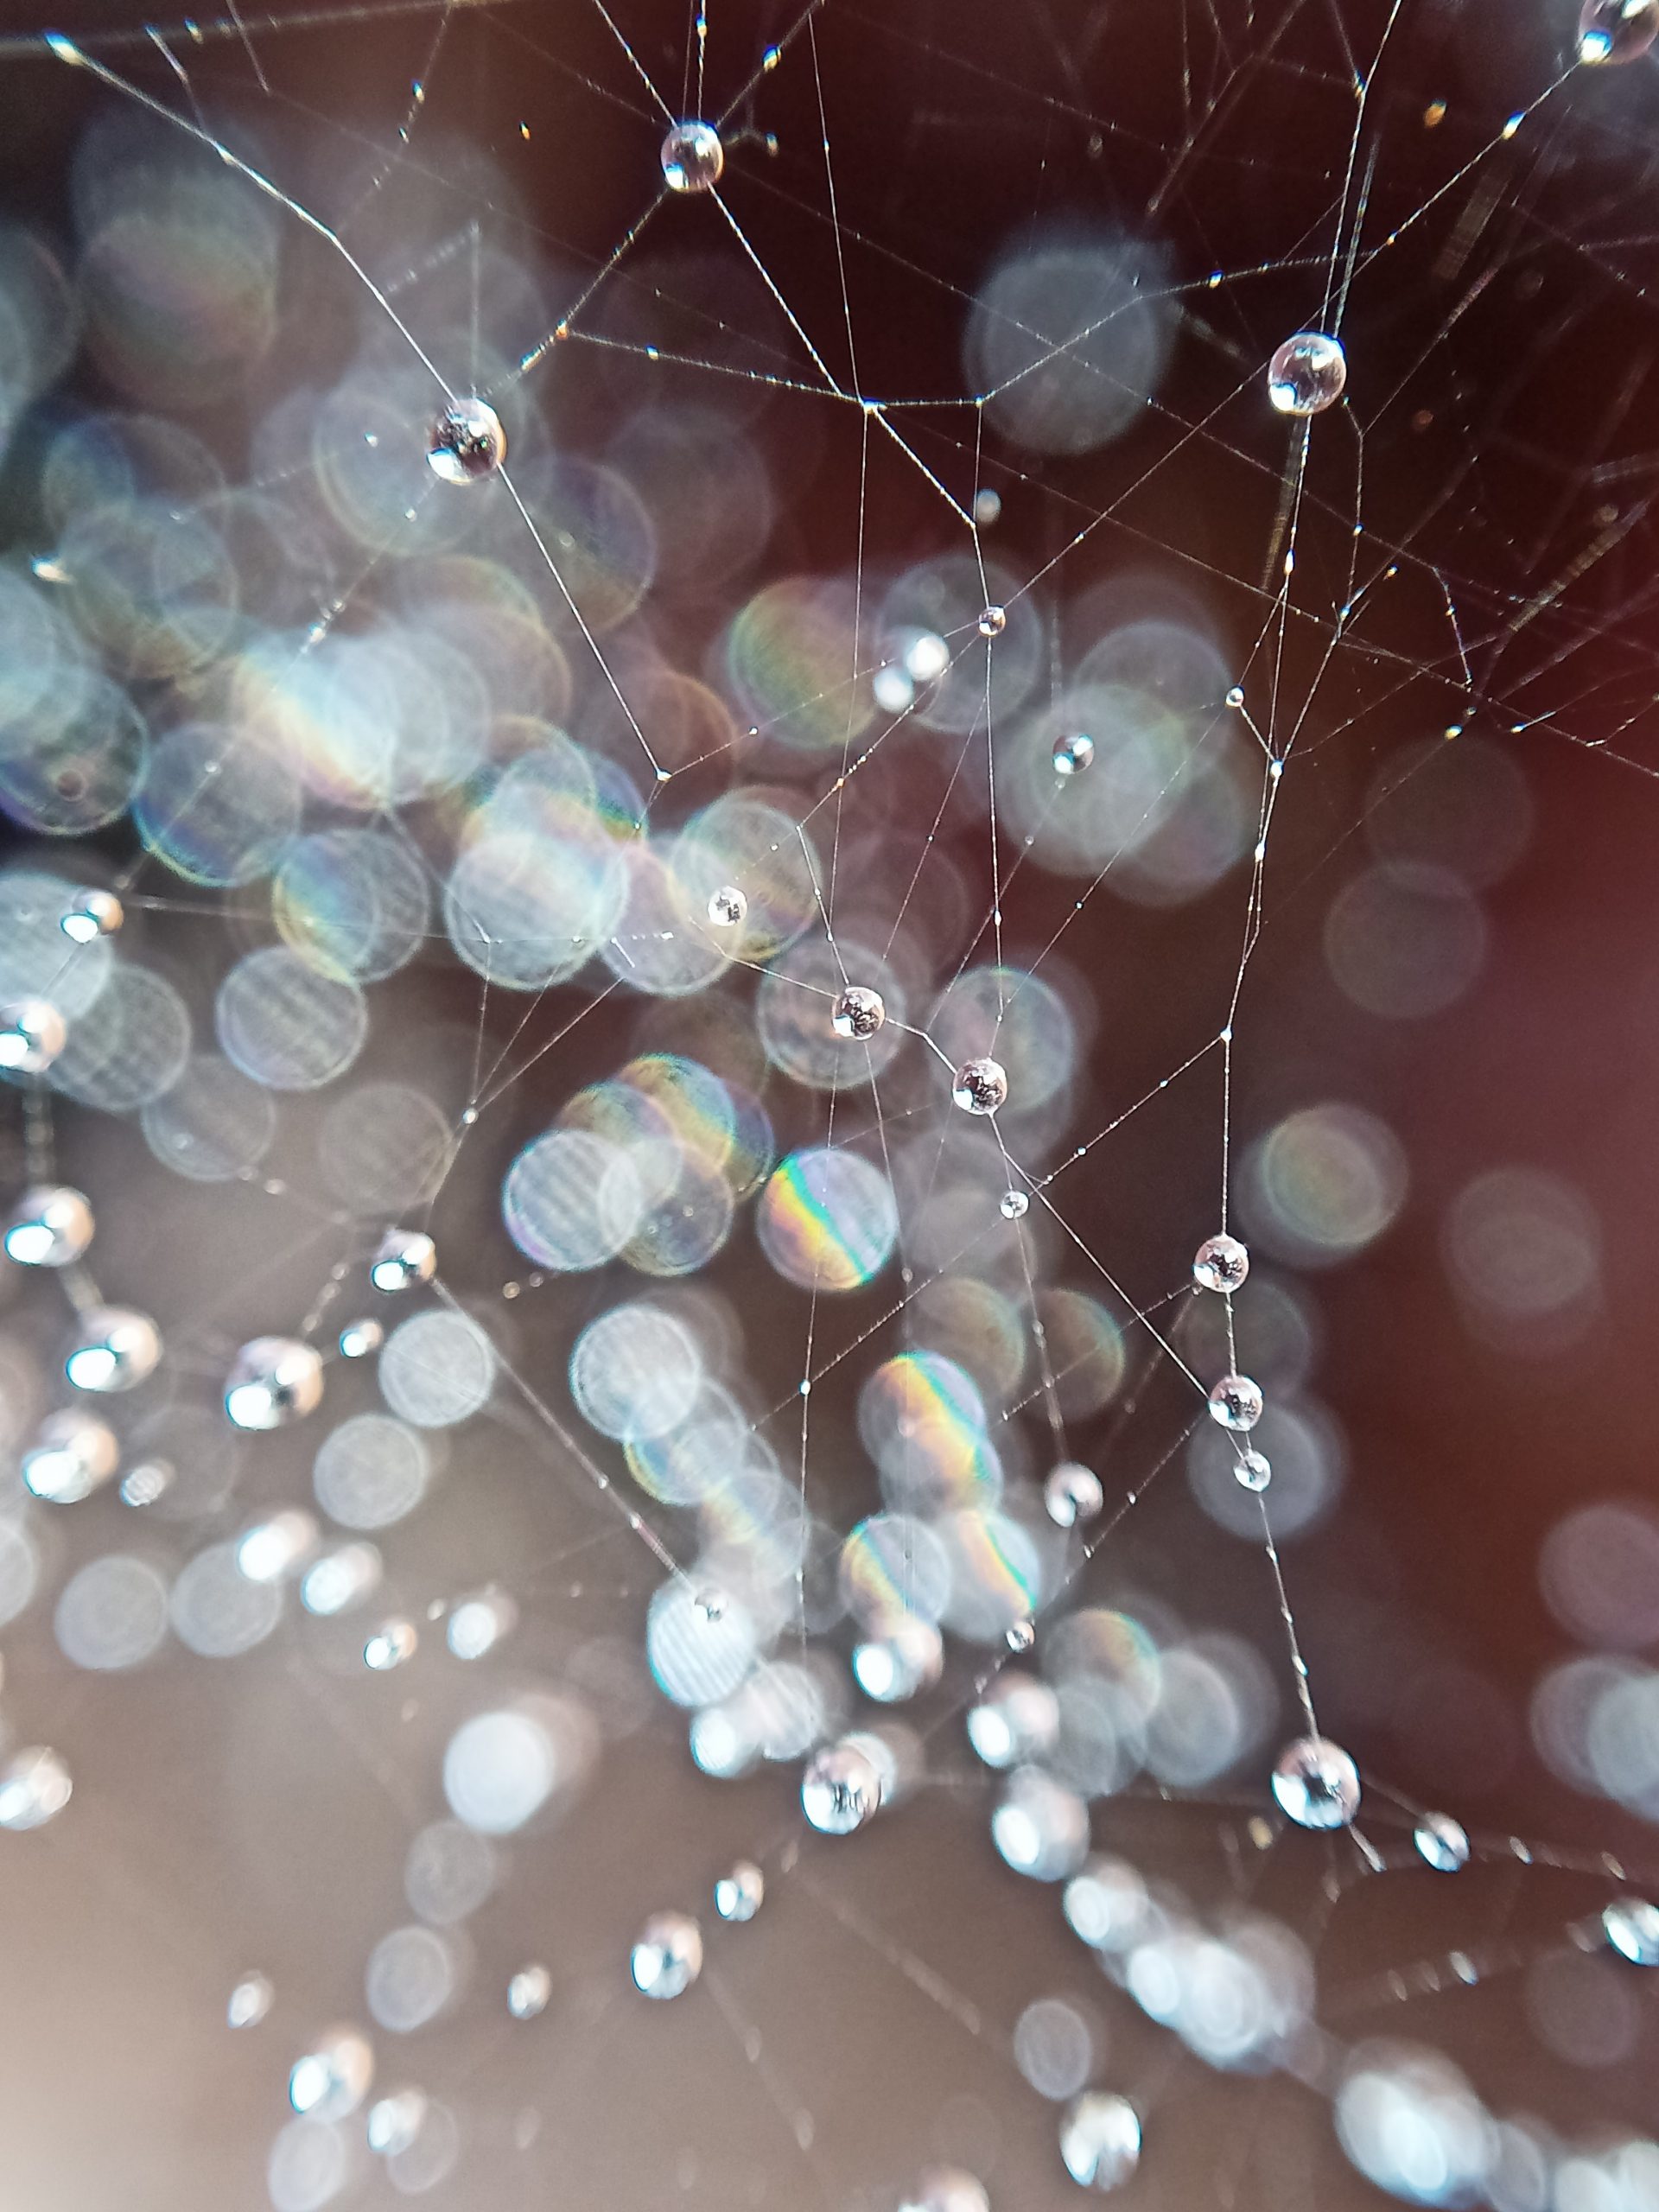 Drops on spider web